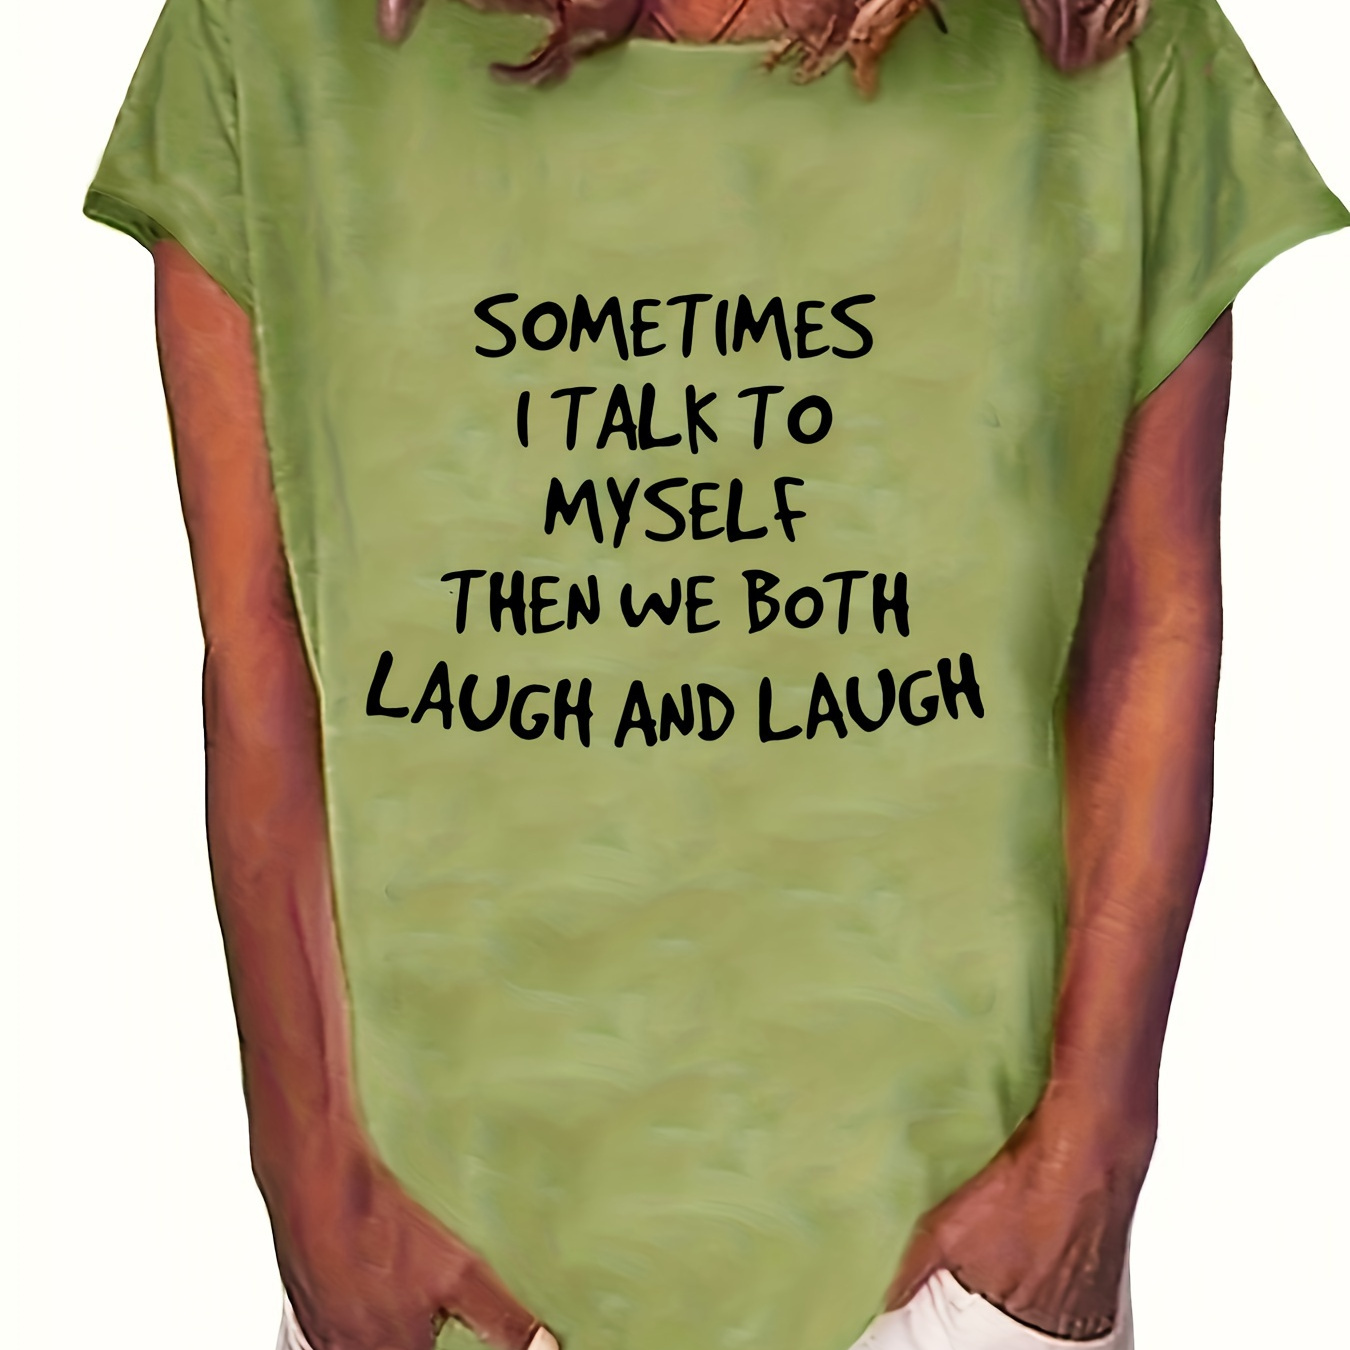 

Sometimes I Talk To Myself Then We Both Laugh And Laugh Printed Short Sleeve T-shirt, Sports Fitness Yoga Running Top, Women's Clothing